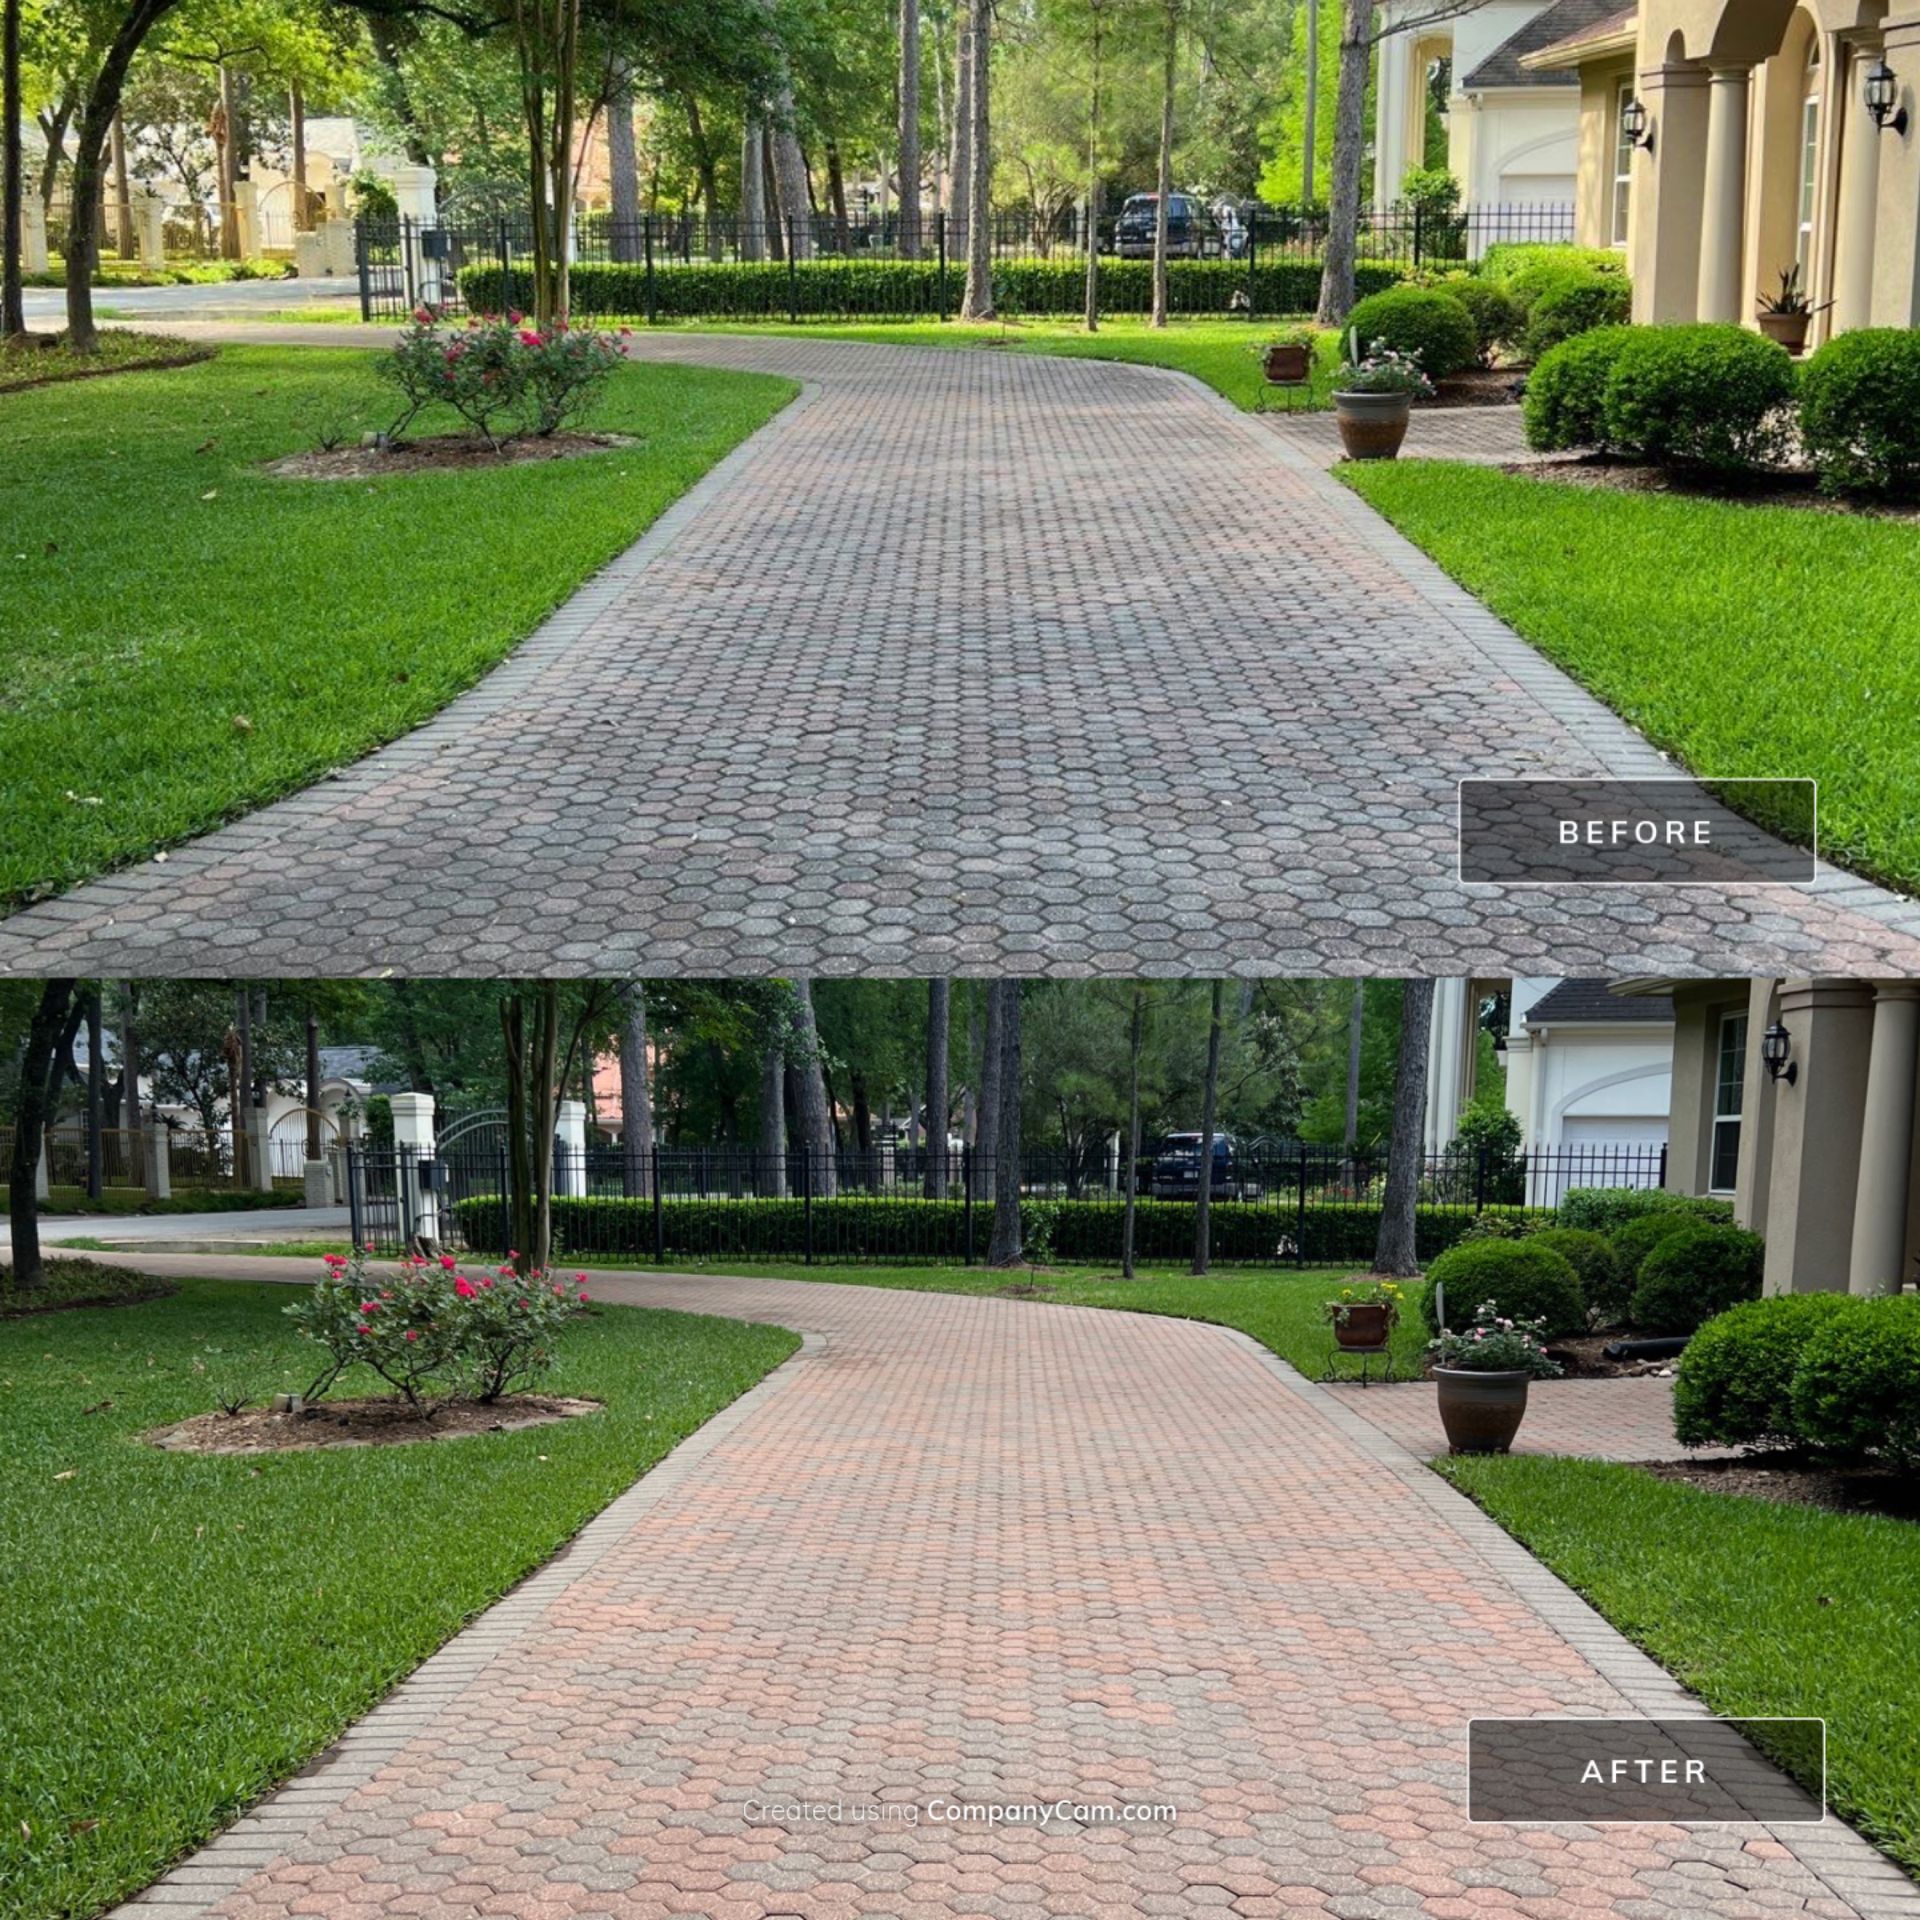 How to Pressure Wash a Driveway